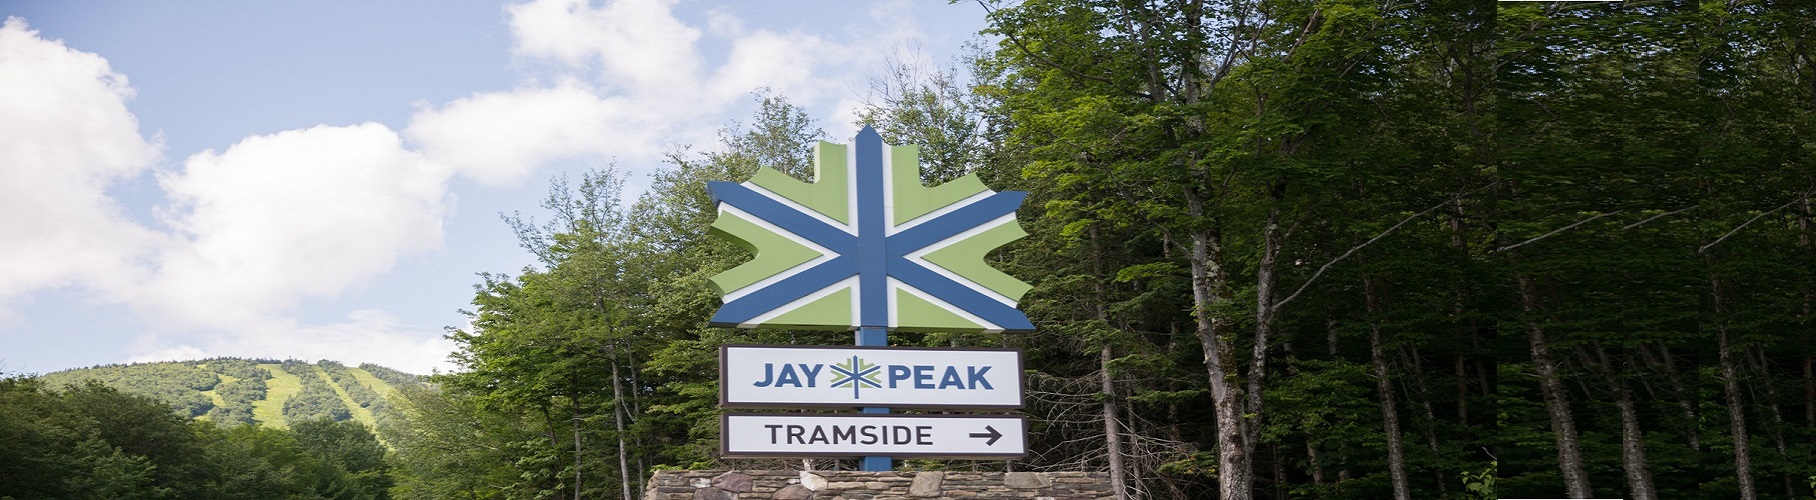 Jay Peak Runners are rewarded with